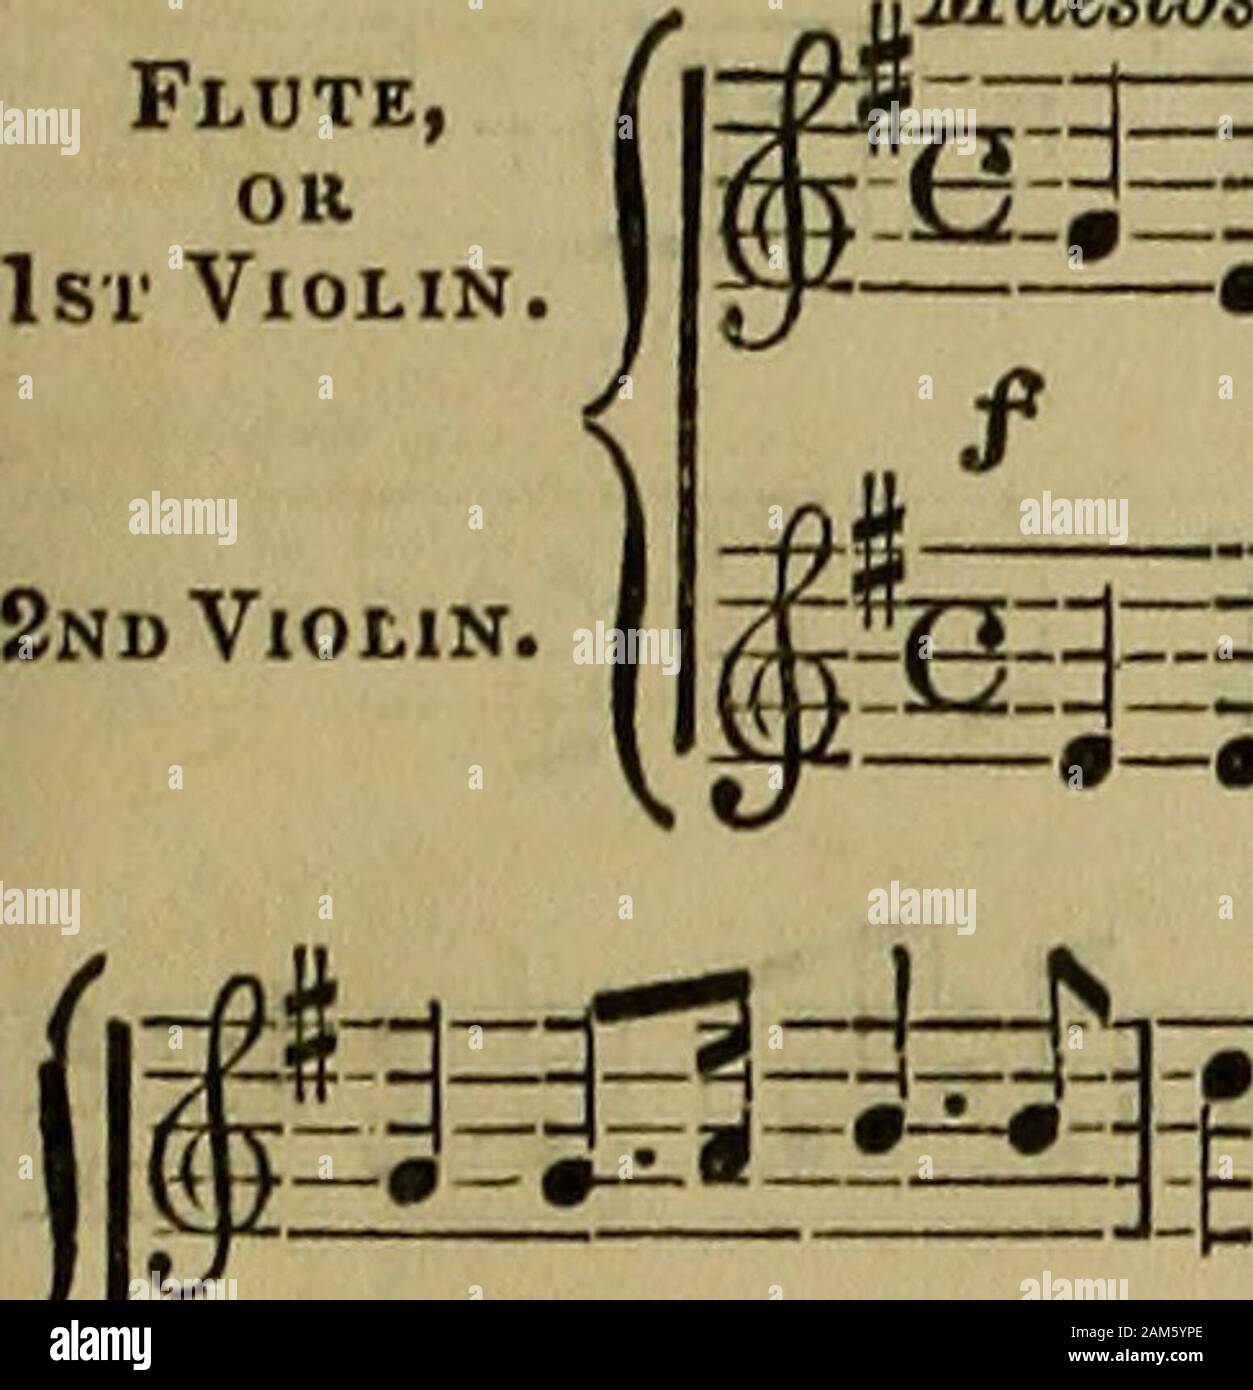 [A composite music volume : containing Davidson's musical miracles eighty-four duets for a shilling, adapted for the violin, flute, accordion, or any treble instrument, and Davidson's musical miracles one hundred and fifty Scotch songs for a shilling] . ] 1—^-^ N—1 -r—! i i —I 1—I i i i—i ??i: , , , -P-»-»-*-P-»-»-l-»H H=r,n ipp-i:rp=p=i: i ^mlmJm.^ •- -^ -•-# -•-•-•-•-•-•-•-I—* •-^— « •-C-# § 1 I^^^^PIftip^^^g-l^li fep.77=ri:pj^pi:rr|:3=333^^iirpiirpz-E+:i^:d^=qrrq 34 DAVIDSONS INSTRUMENTAL GEMS. Flu OR IstV THEME IN HAYDNS MILITARY SINFONIA. iAndante. n^i^n ^^ • &gt; lOLIN. I ^ -[ 1 1 I i Stock Photo